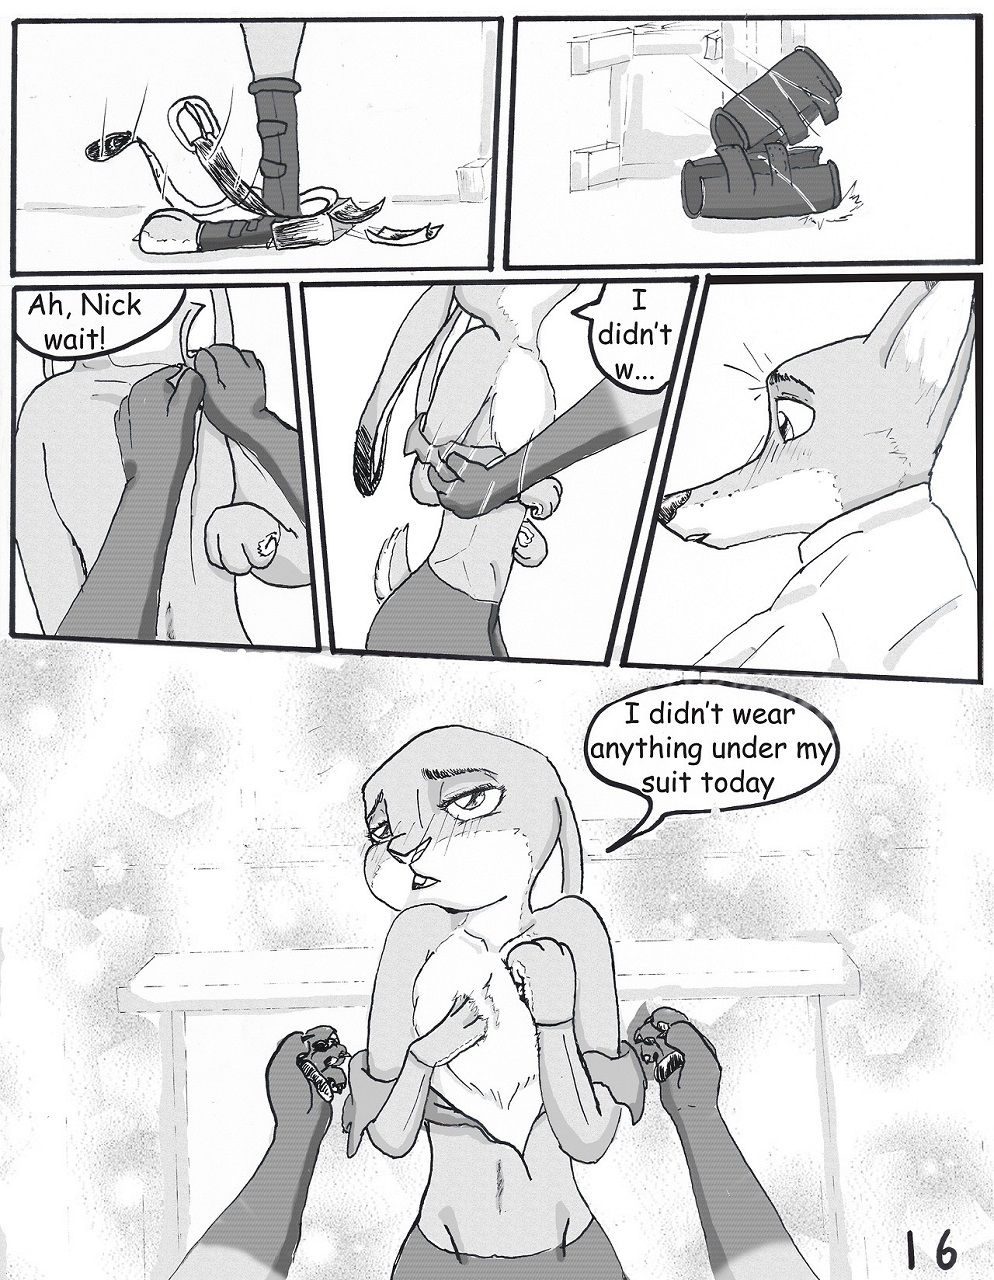 [TheGorySaint] Not Again. (Zootopia) [Ongoing] 17